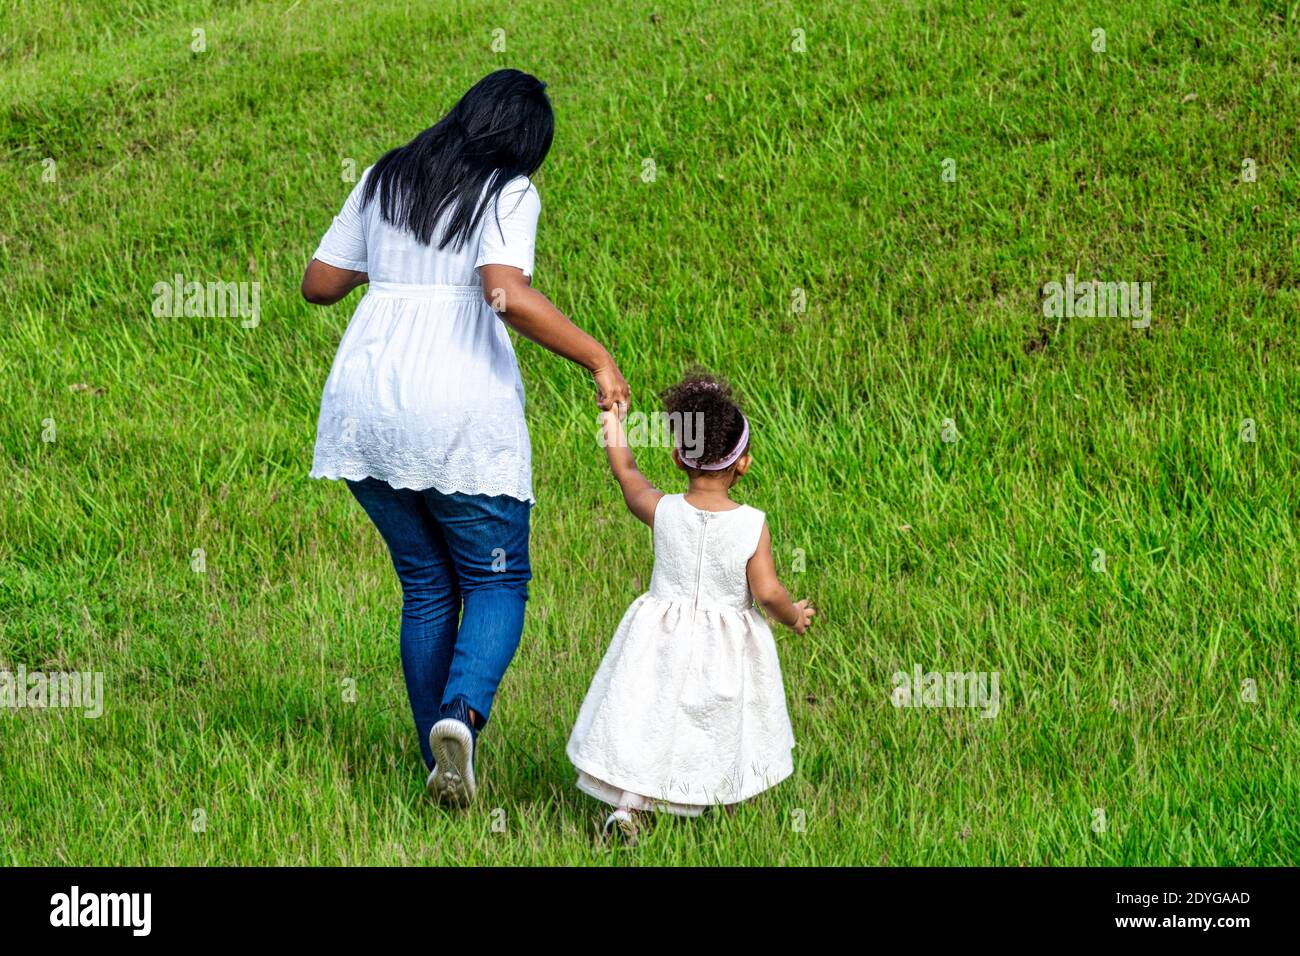 Afro-Caribbean mother and daughter walking in a lawn, Cuba Stock Photo